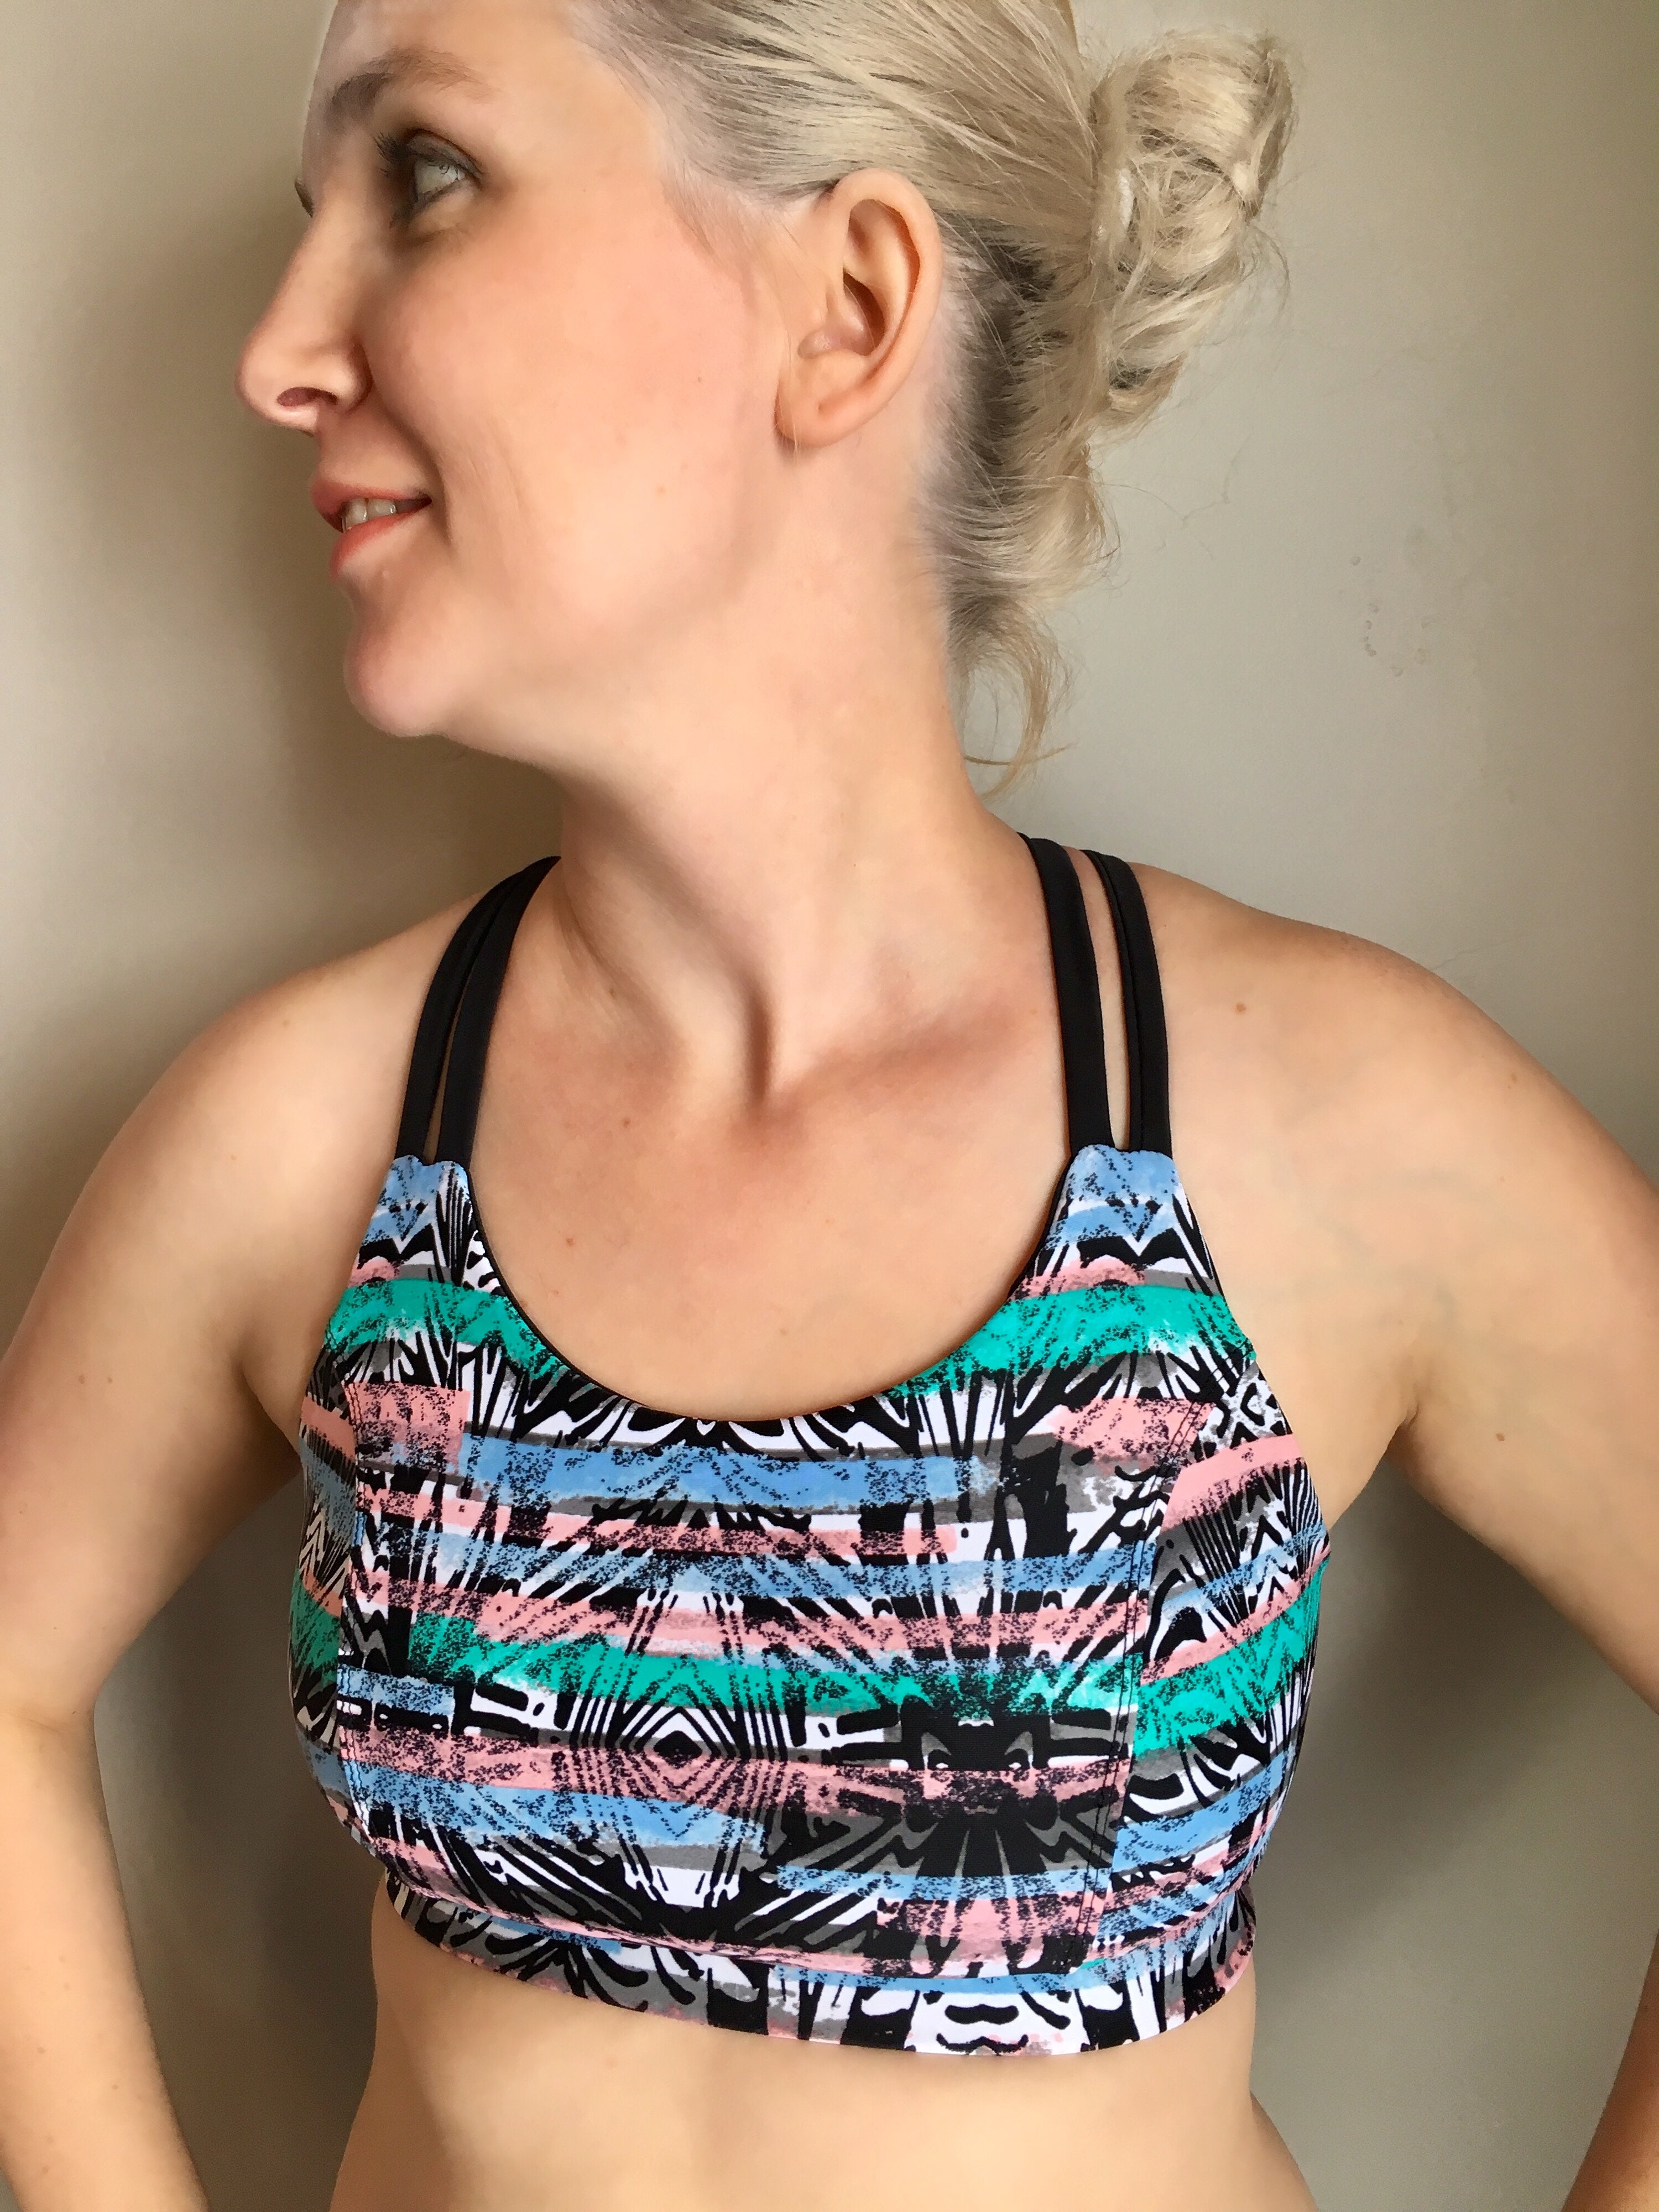 Greenstyle Fit Capsule Challenge and My Perfect Sports Bra — Angel Sews